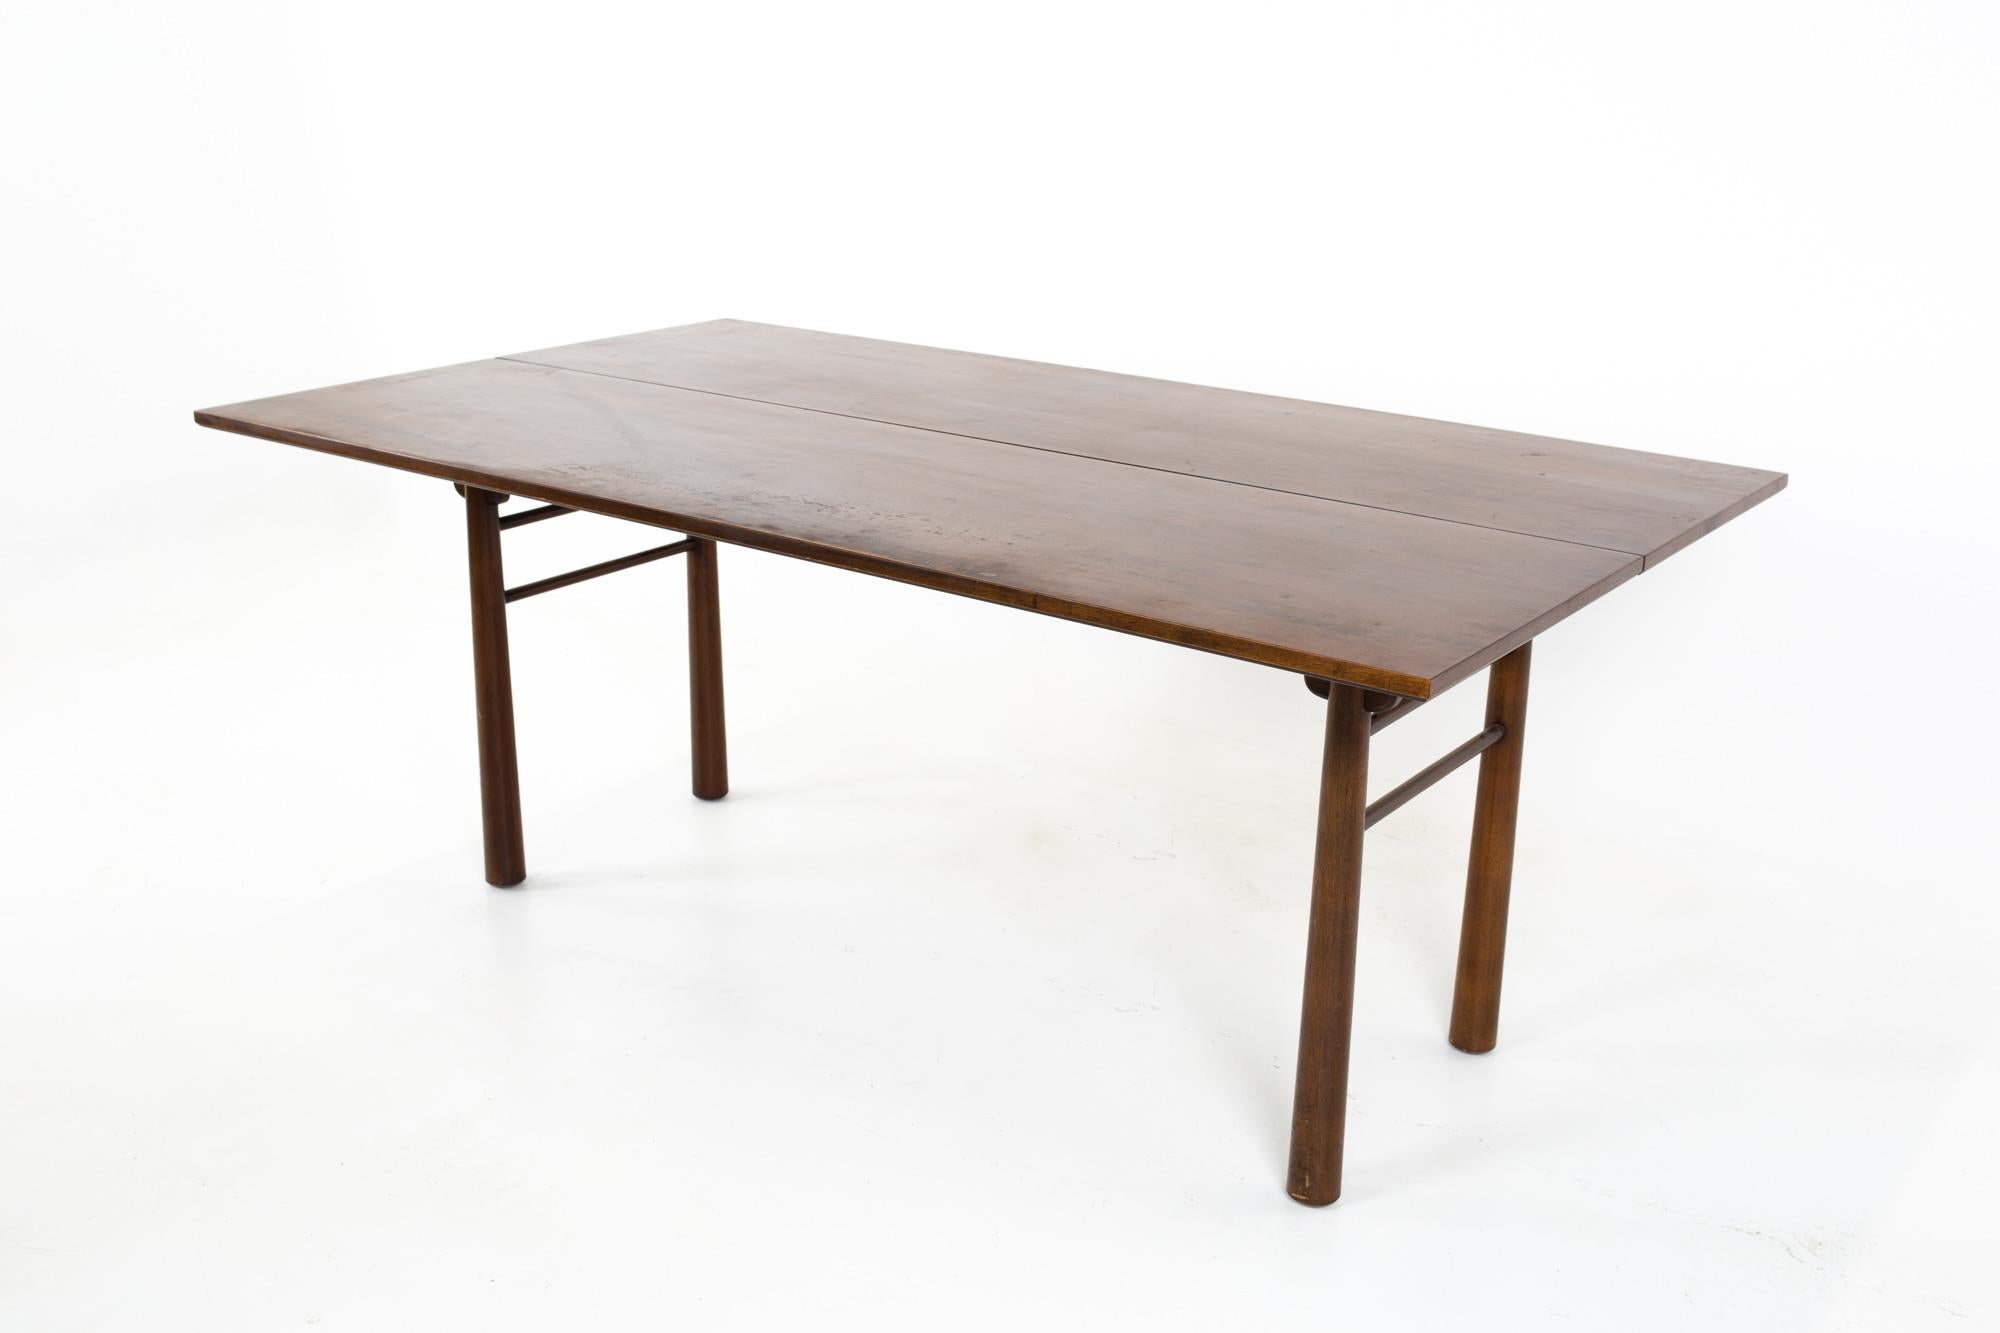 Henredon Robsjohn Gibbings style mid century walnut drop leaf dining console table
Table measures: 66 wide x 38 deep x 28.5 inches high

All pieces of furniture can be had in what we call restored vintage condition. That means the piece is